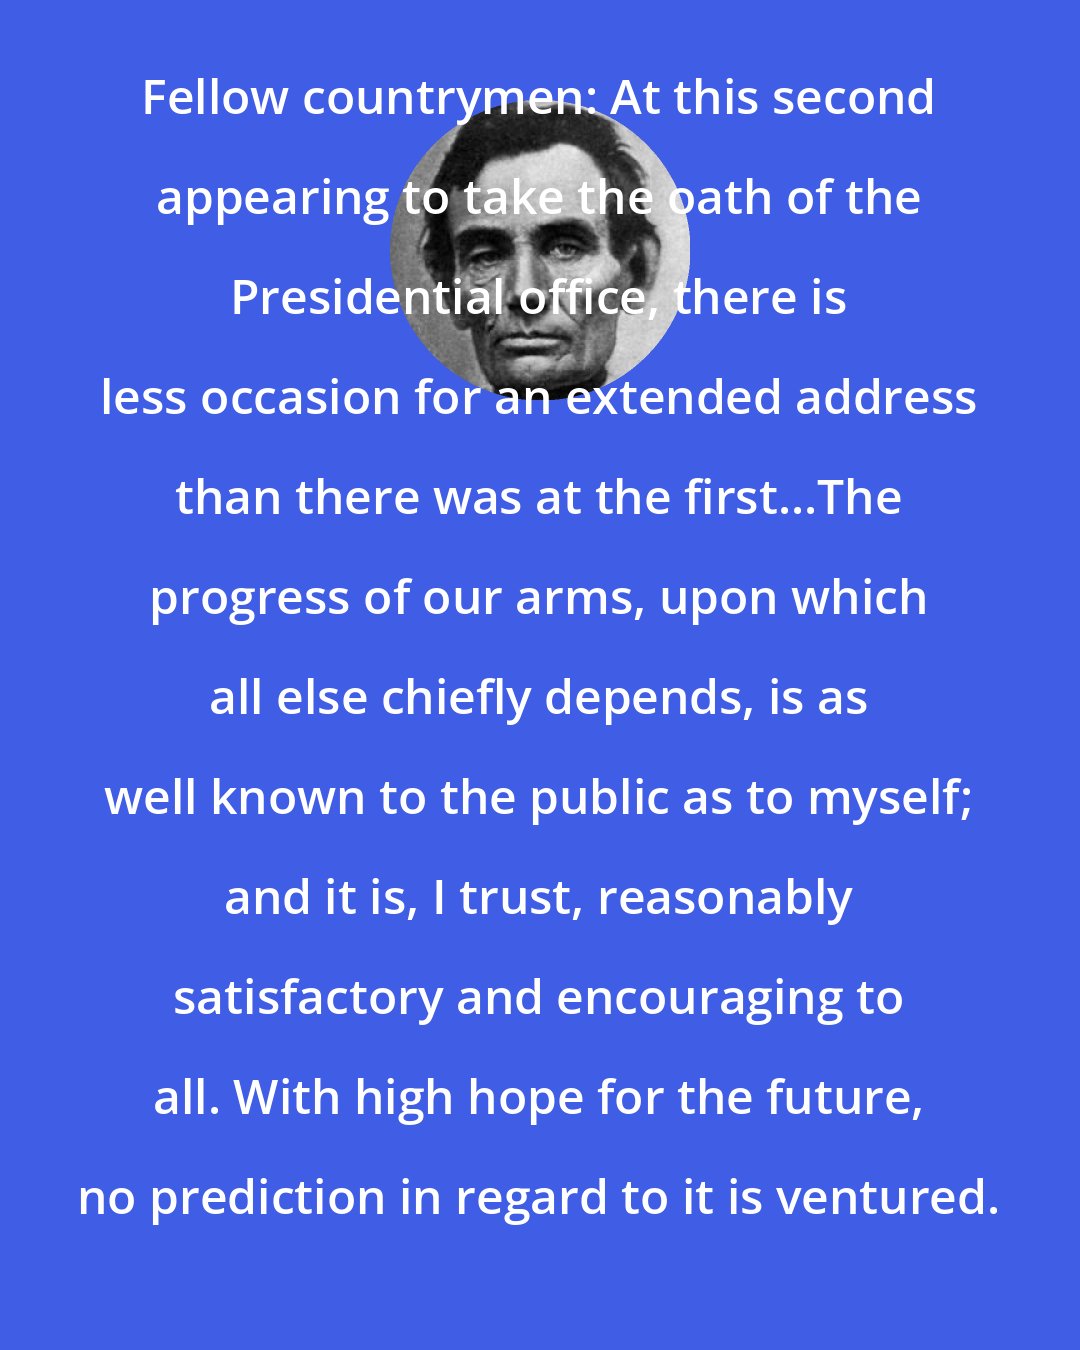 Abraham Lincoln: Fellow countrymen: At this second appearing to take the oath of the Presidential office, there is less occasion for an extended address than there was at the first...The progress of our arms, upon which all else chiefly depends, is as well known to the public as to myself; and it is, I trust, reasonably satisfactory and encouraging to all. With high hope for the future, no prediction in regard to it is ventured.